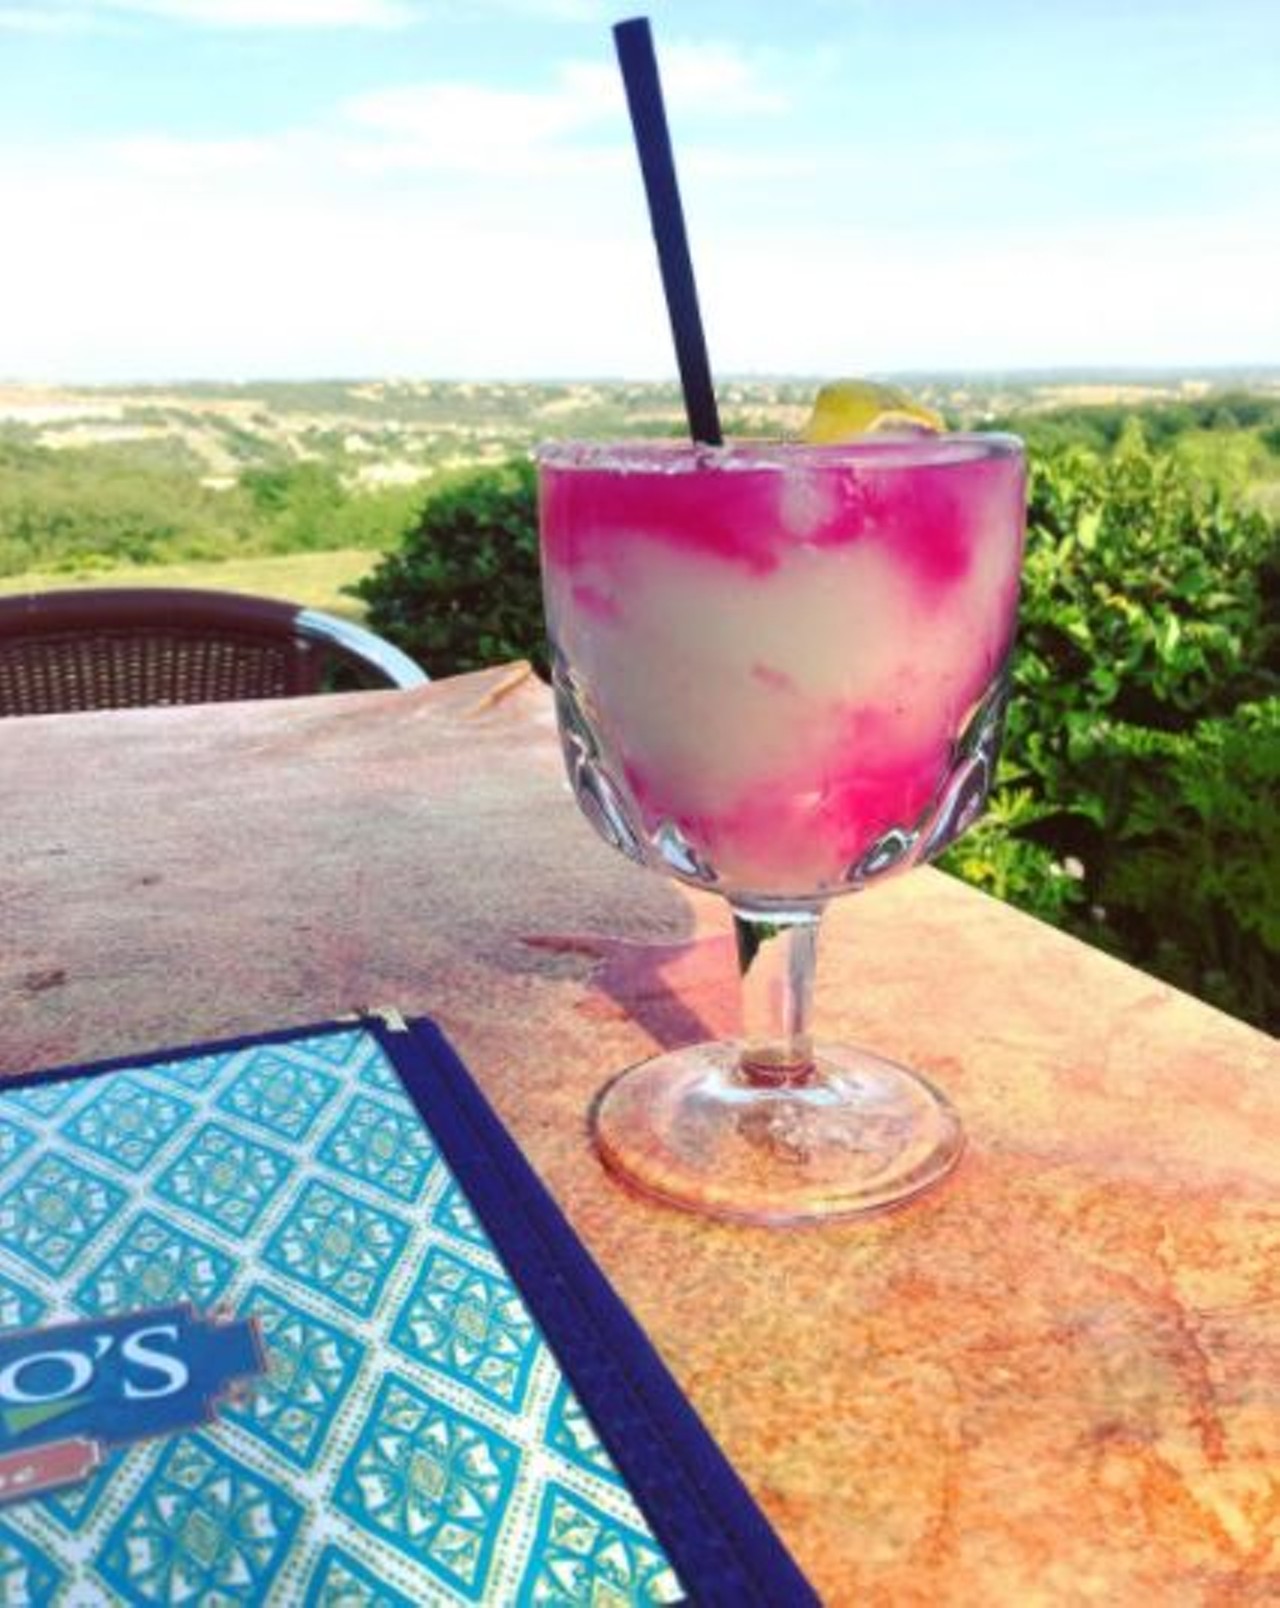 Aldaco&#146;s Mexican Cuisine
20079 Stone Oak Pkwy., (210) 494-0561
Check out the amazing views from the outdoor patio while sipping on one of Aldaco&#146;s tasty margaritas.
Photo via Instagram, nopueslisa